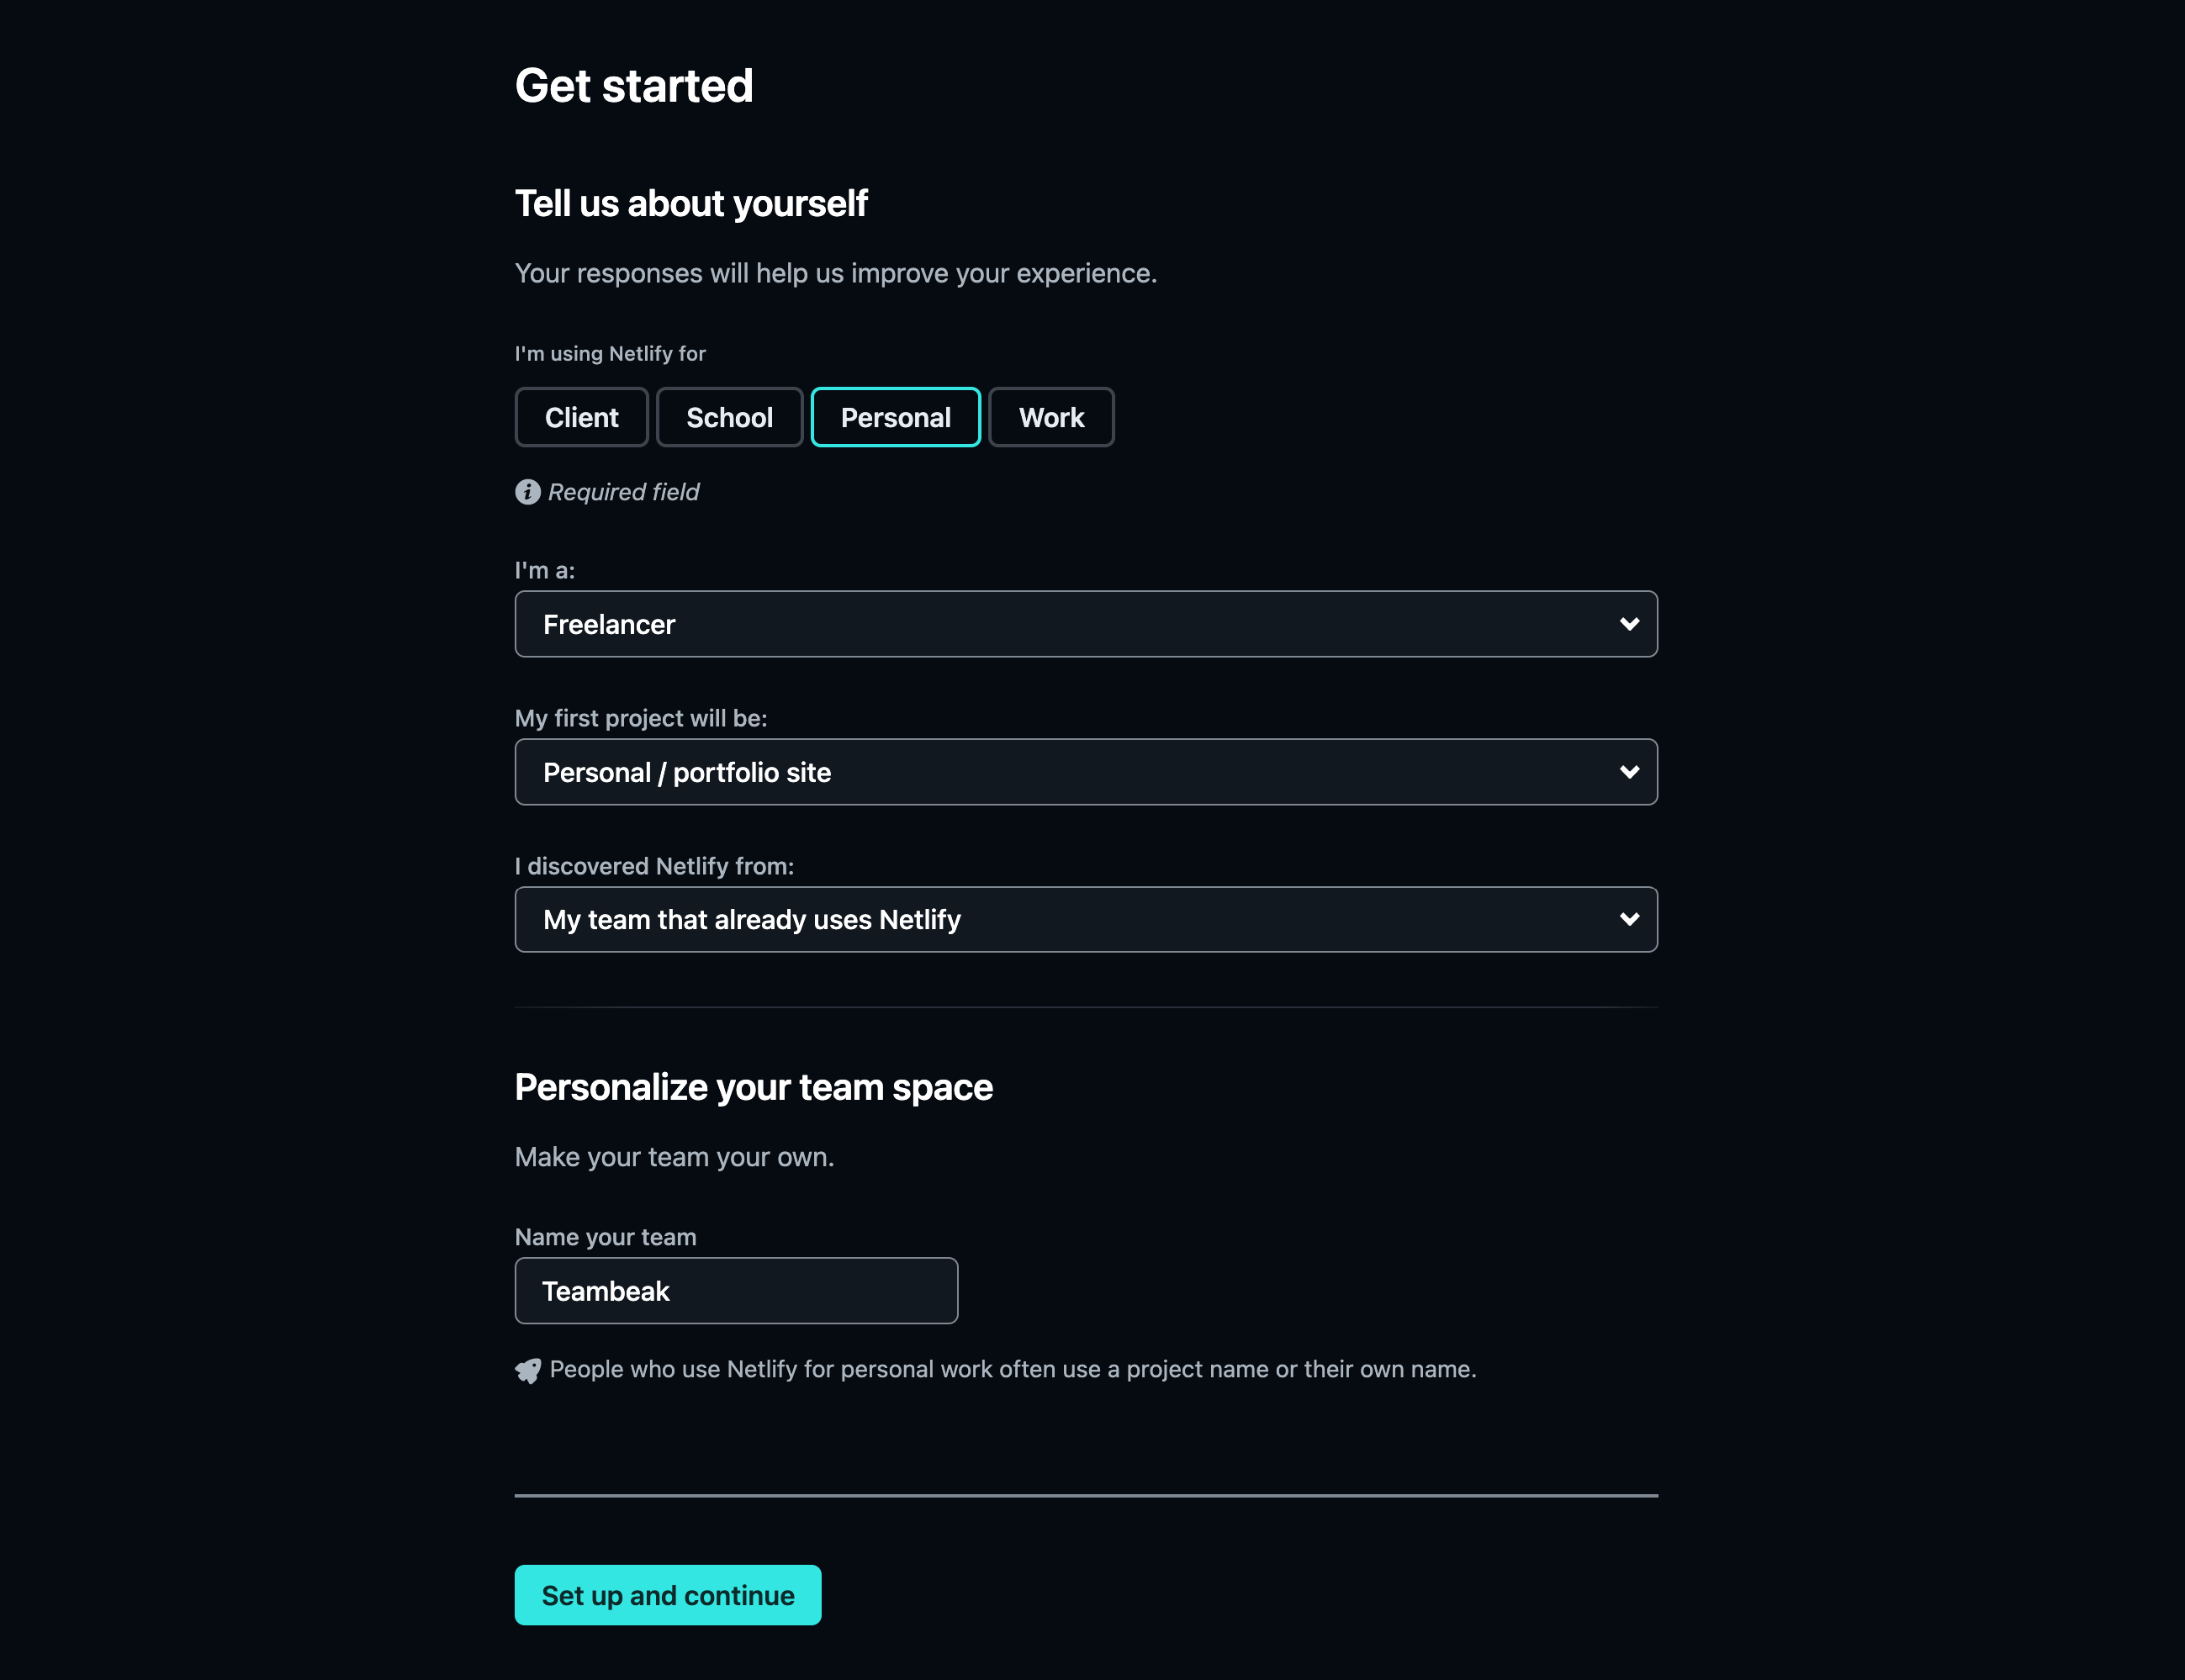 Netlify get started page asks about you and how you're using it